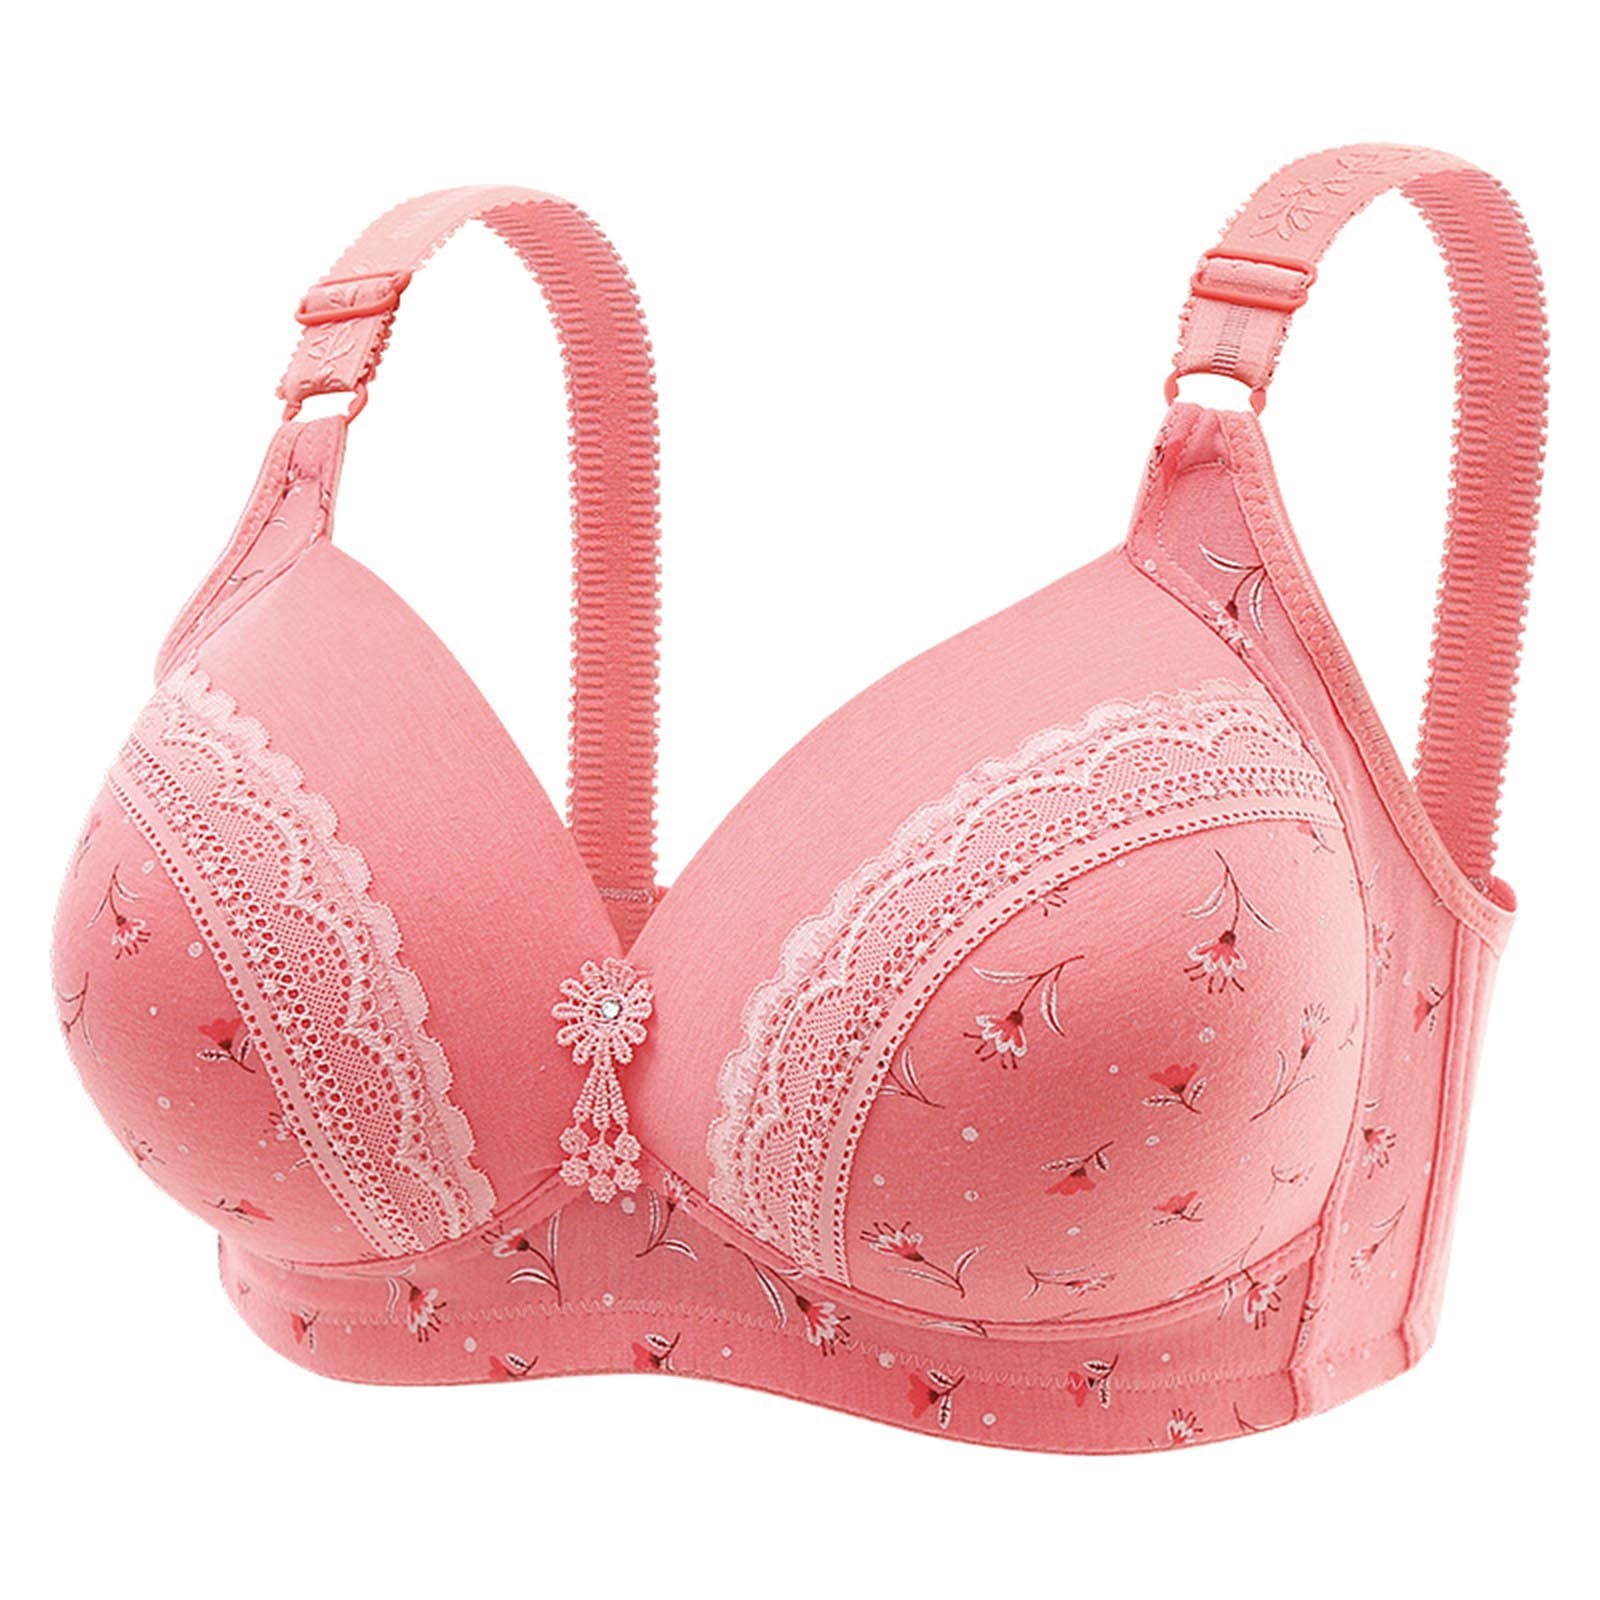 HAPIMO Everyday Bra Wireless for Women Open Front Ultra Light Lingerie  Push-up Comfort Daily Brassiere Underwear Pink M 